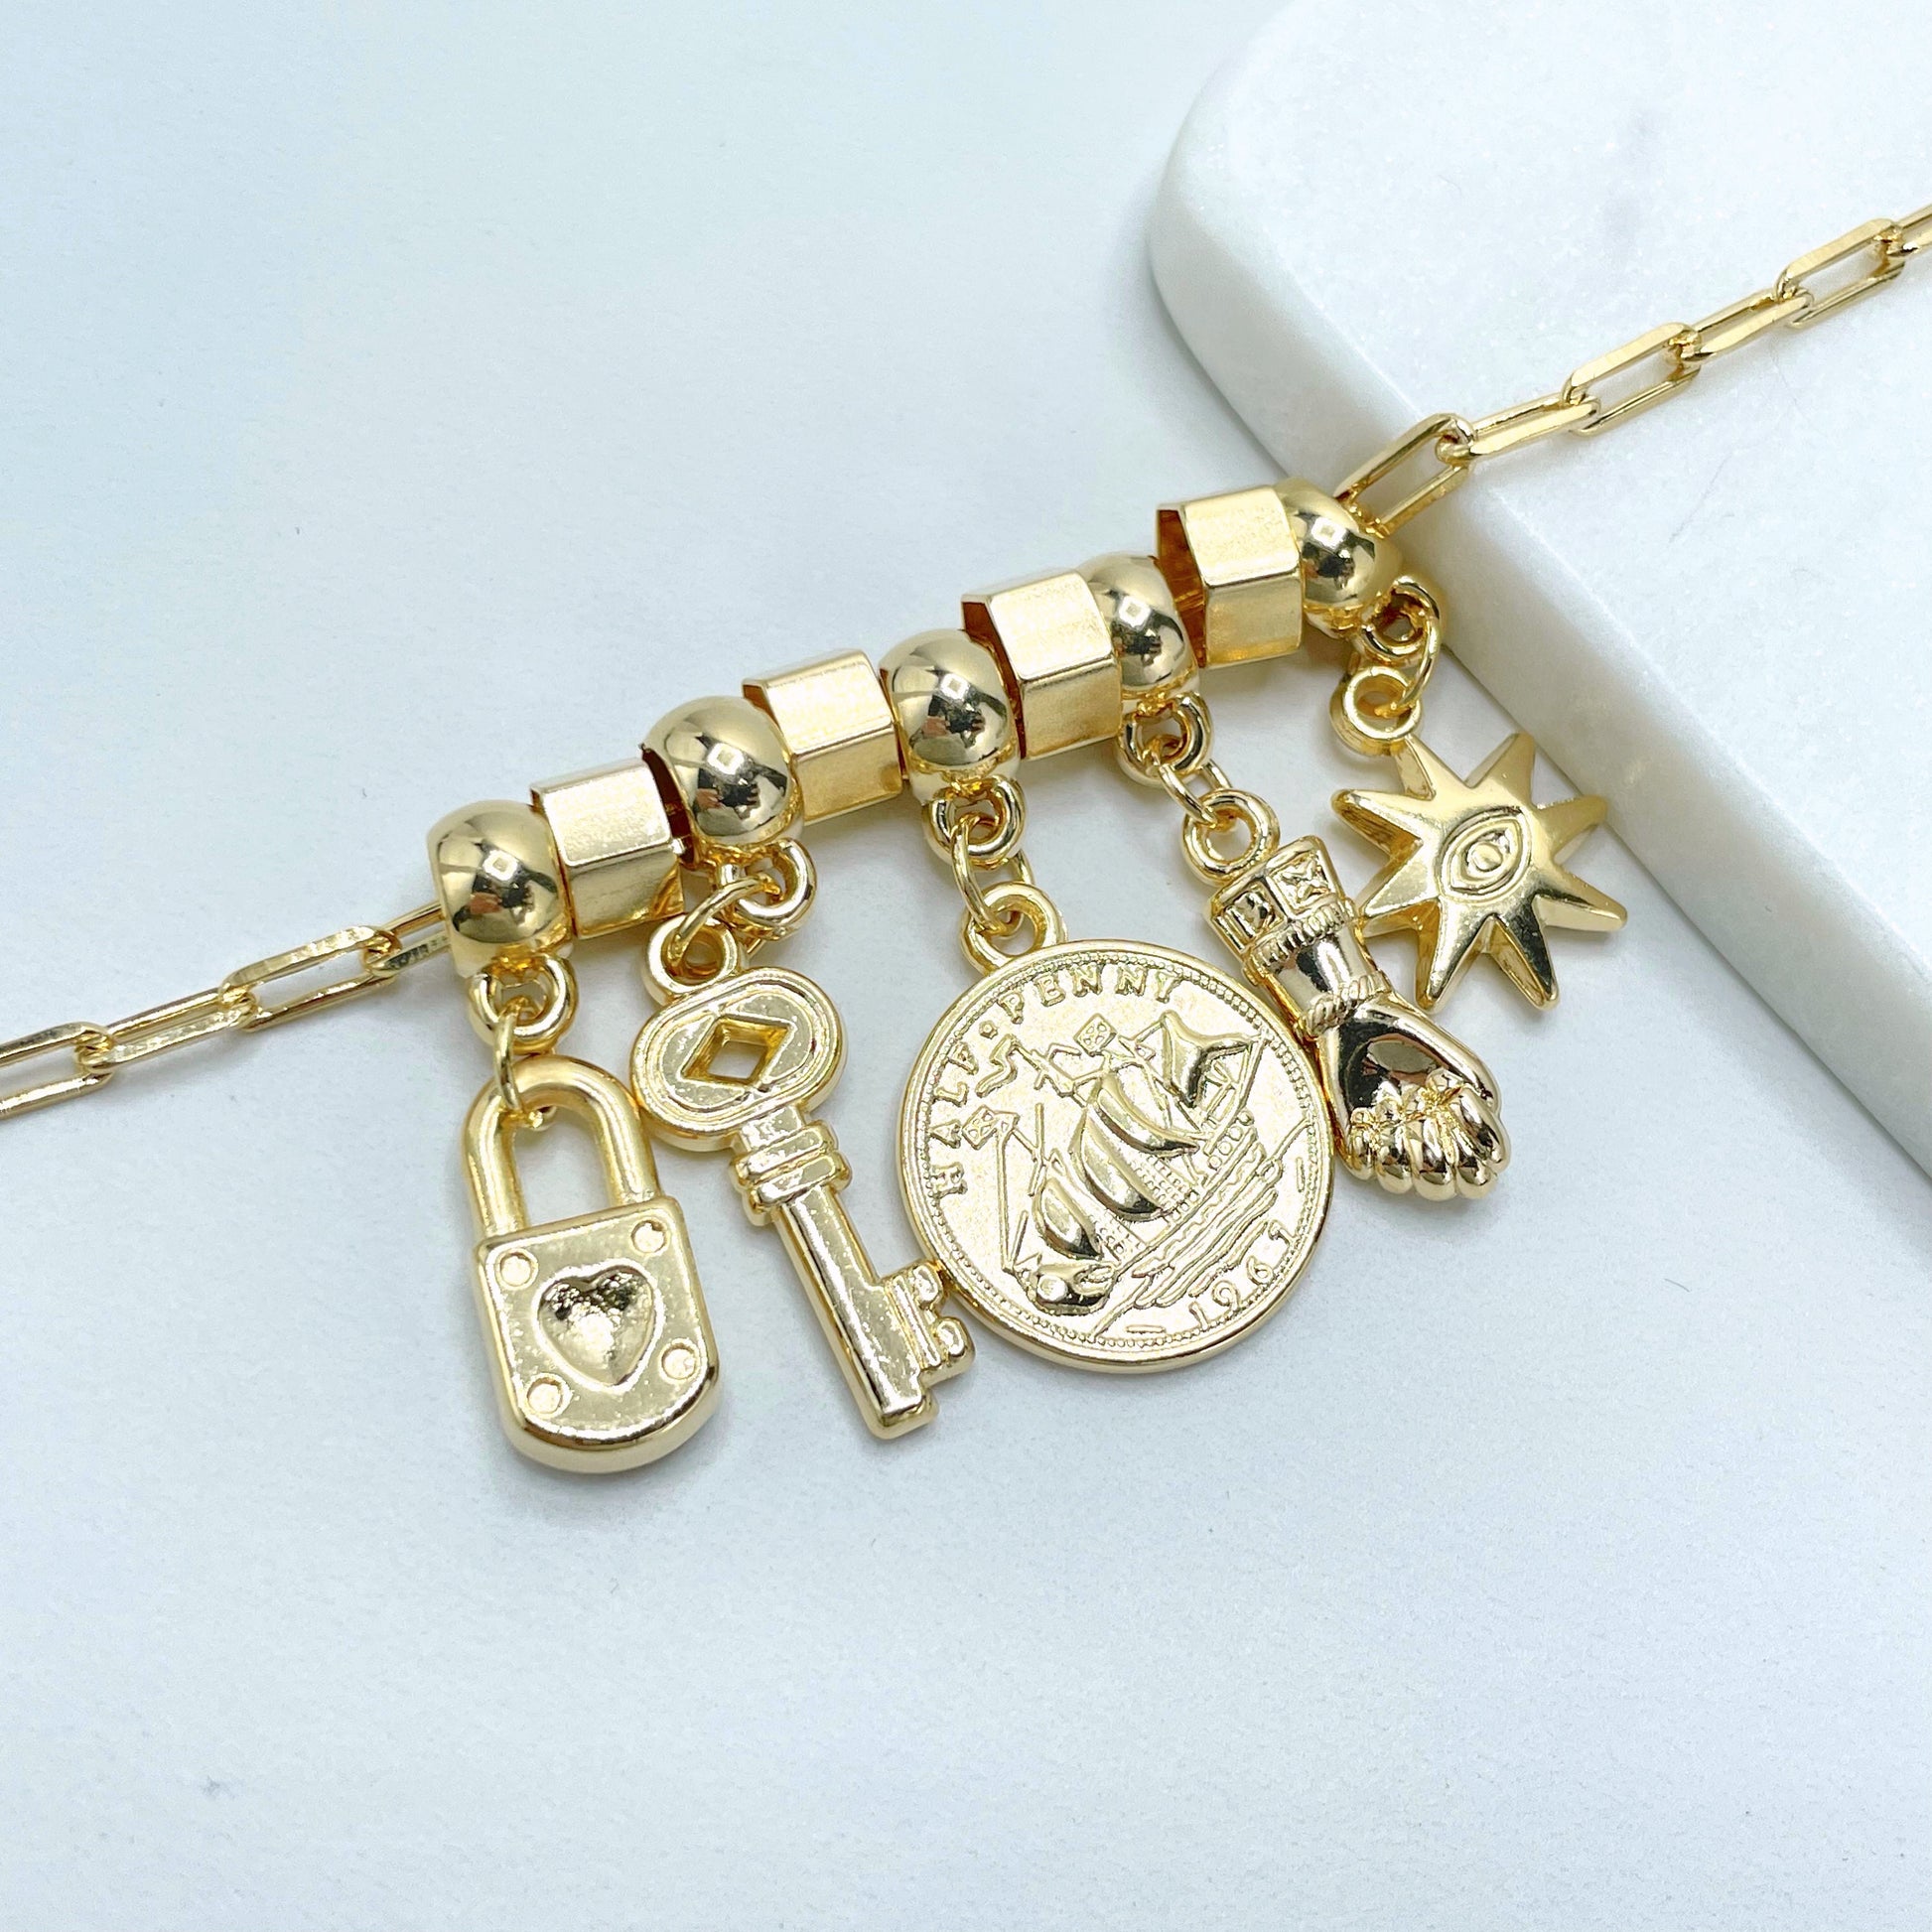 18k Gold Filled 4mm Paperclip Chain, Sun, Lock, Hamsa Hand, Coin, Key & Gold Charms, 8 inches Charms Bracelet, Wholesale Jewelry Supplies